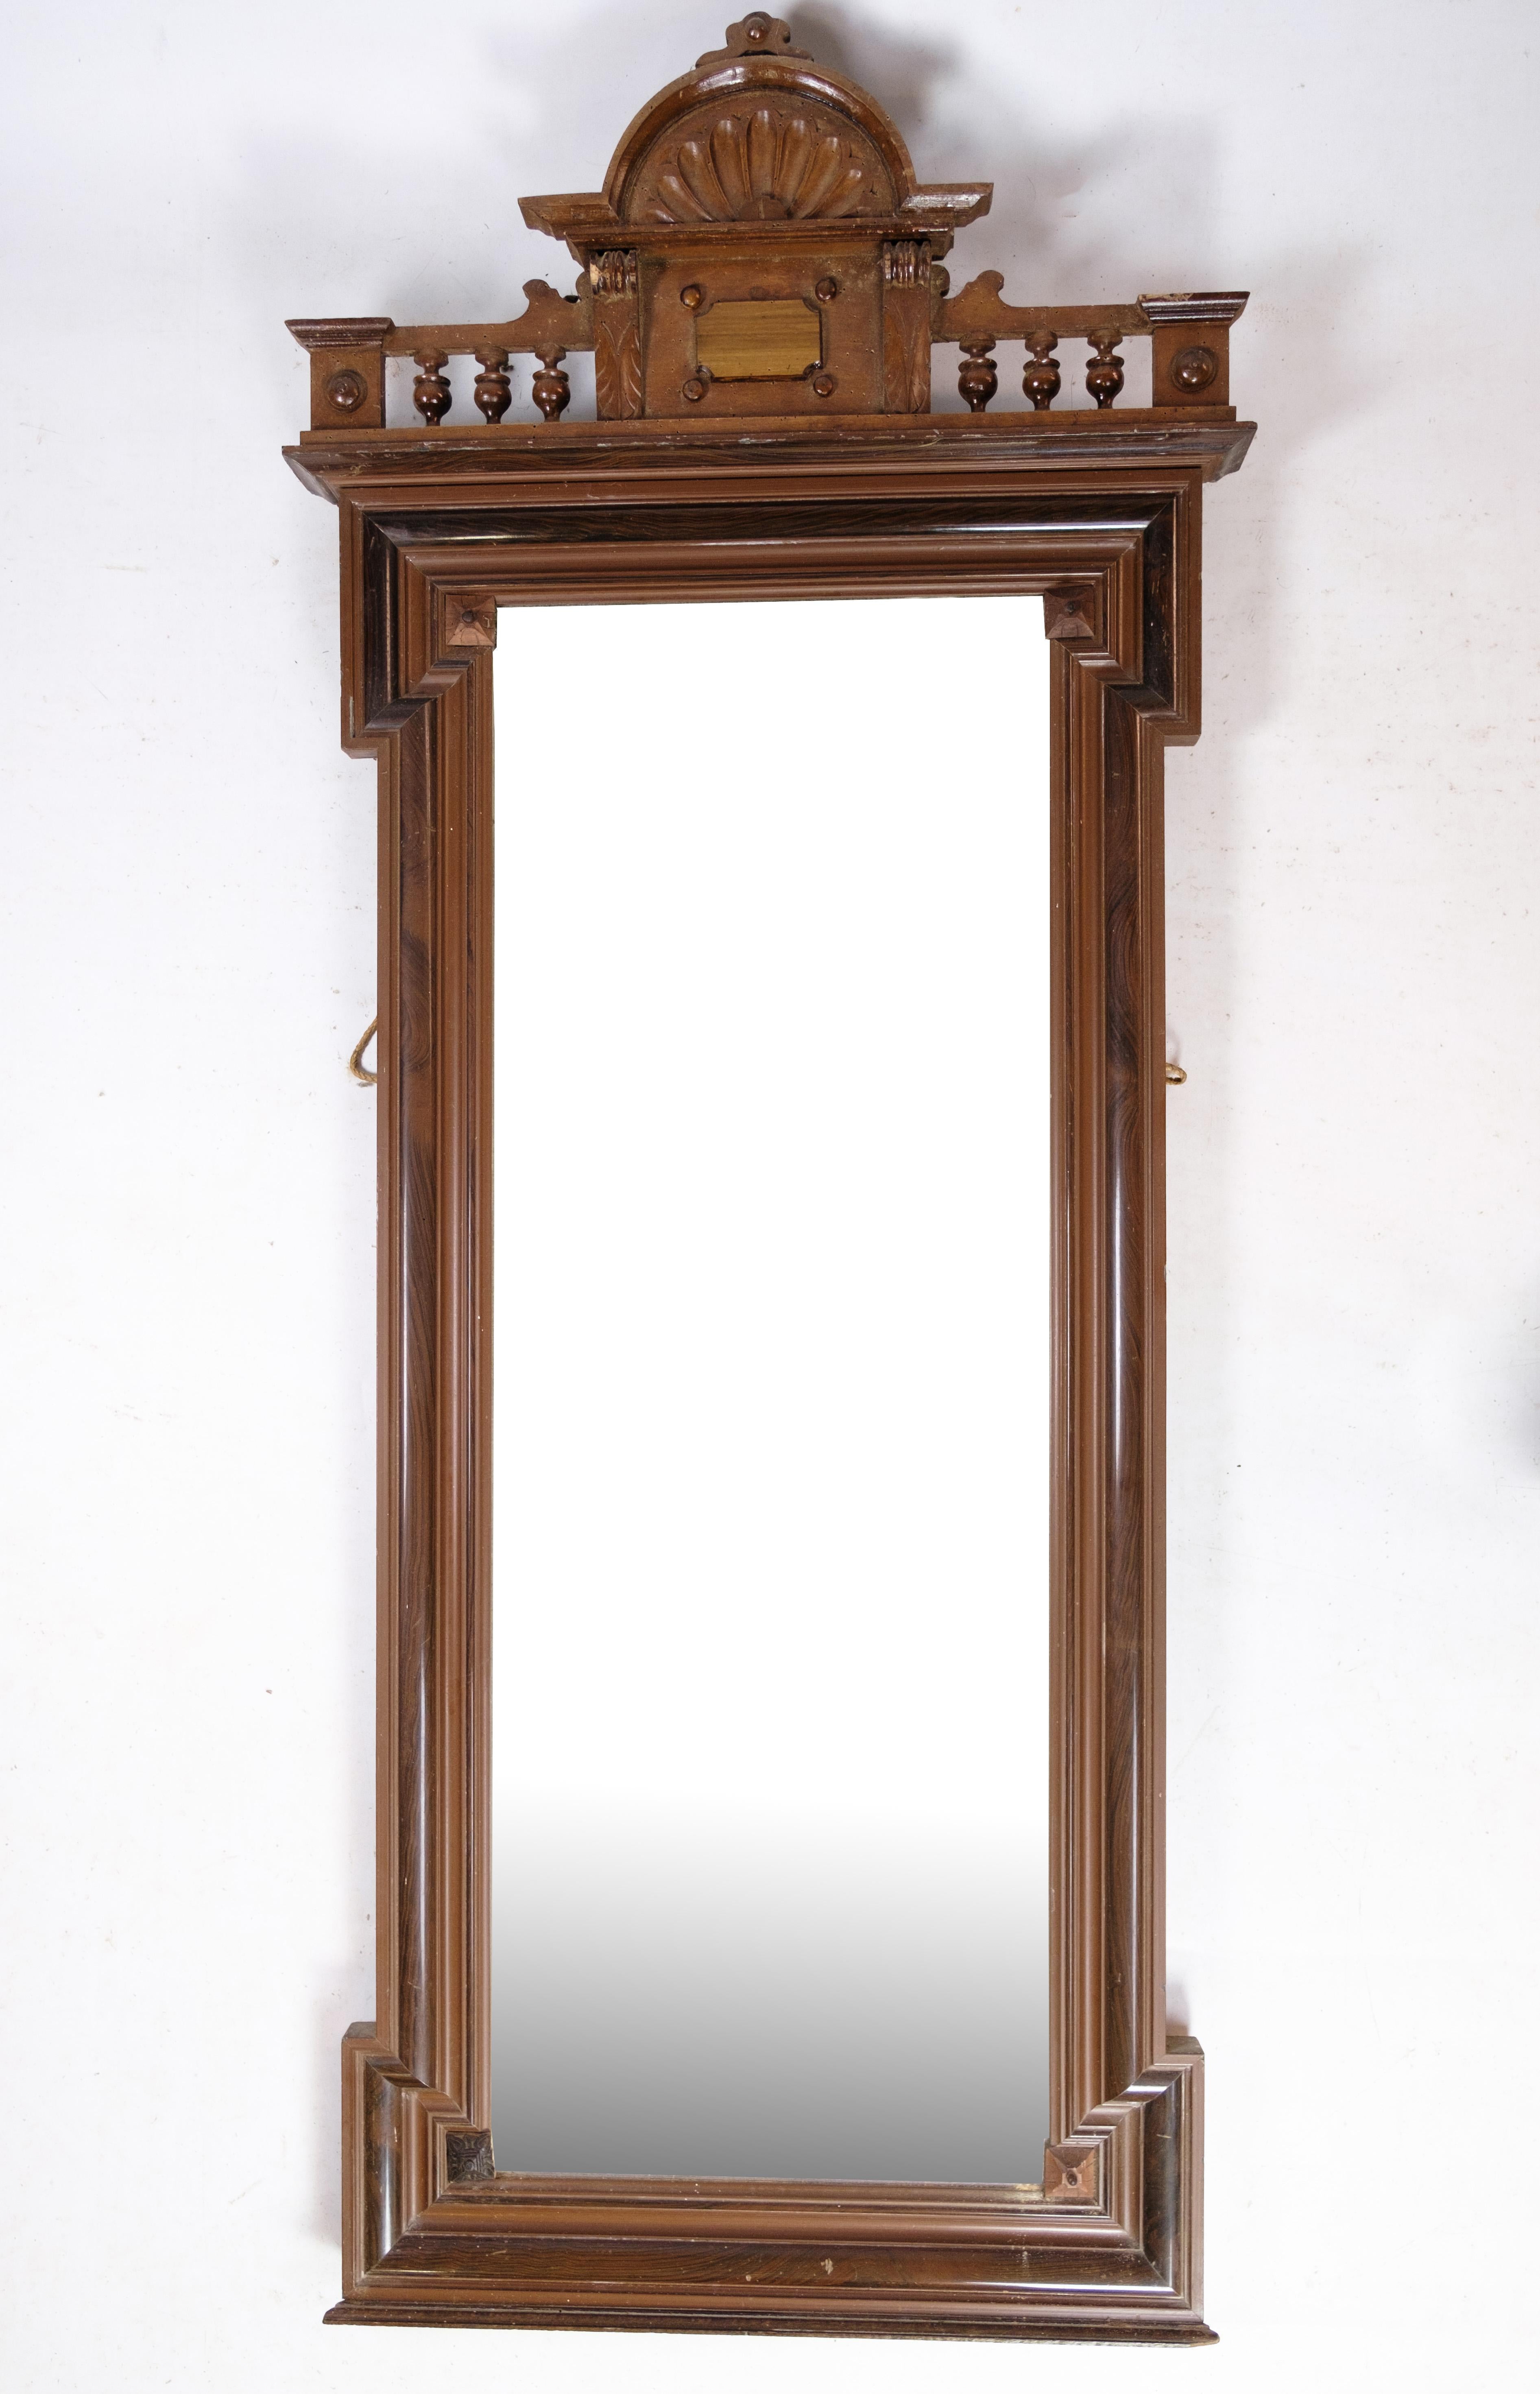 This beautiful hand-polished mahogany mirror is from the late Empire period and was crafted in Denmark around the 1840s. It features intricate carvings along the frame, adding a touch of elegance to the piece. The deep, rich color of the mahogany